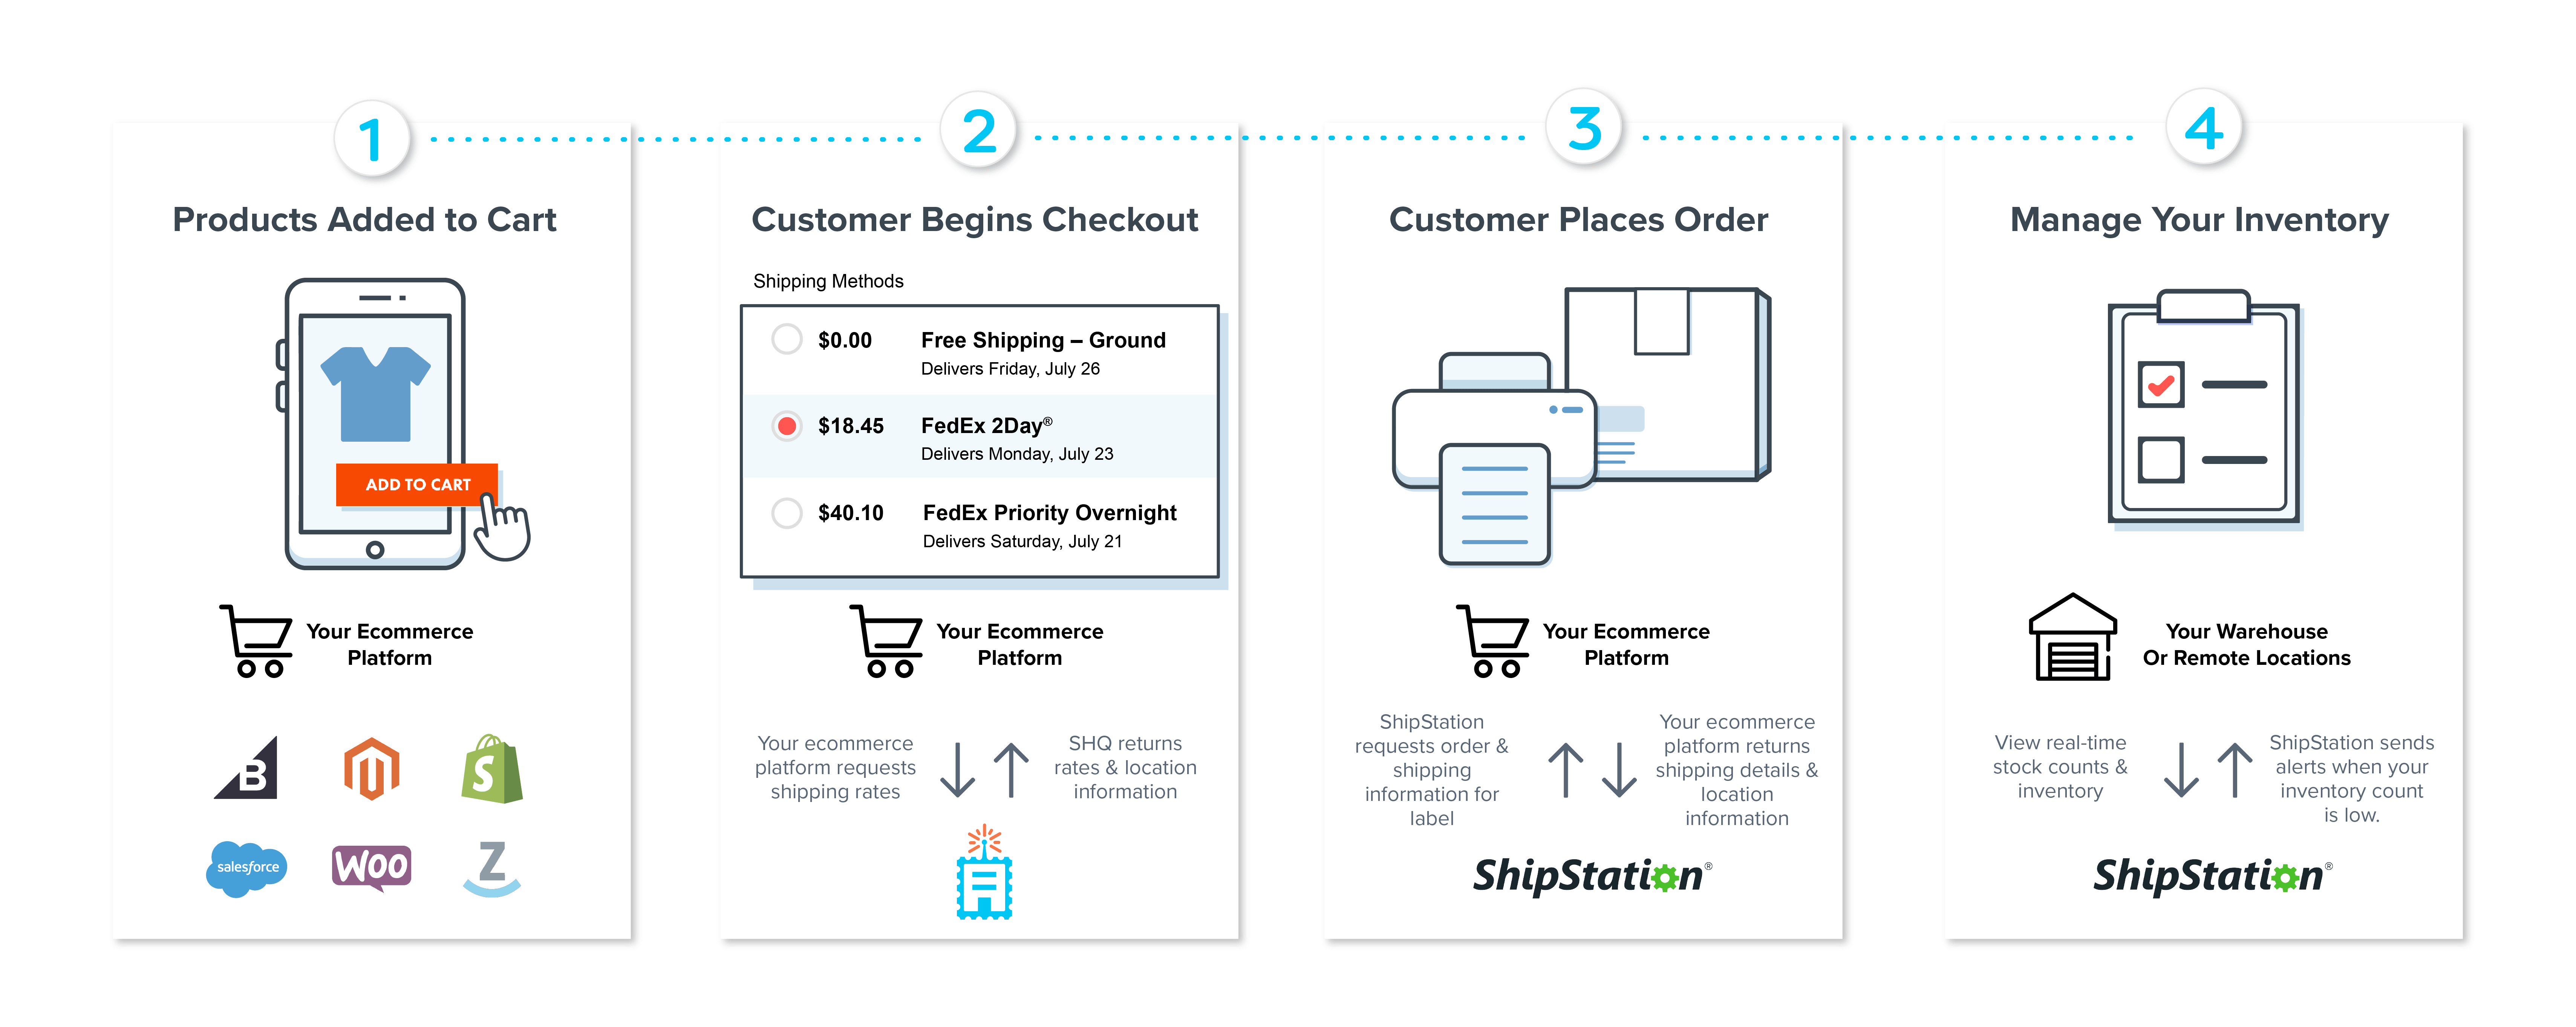 Life-cycle of shopper from product selection though checkout and fulfillment